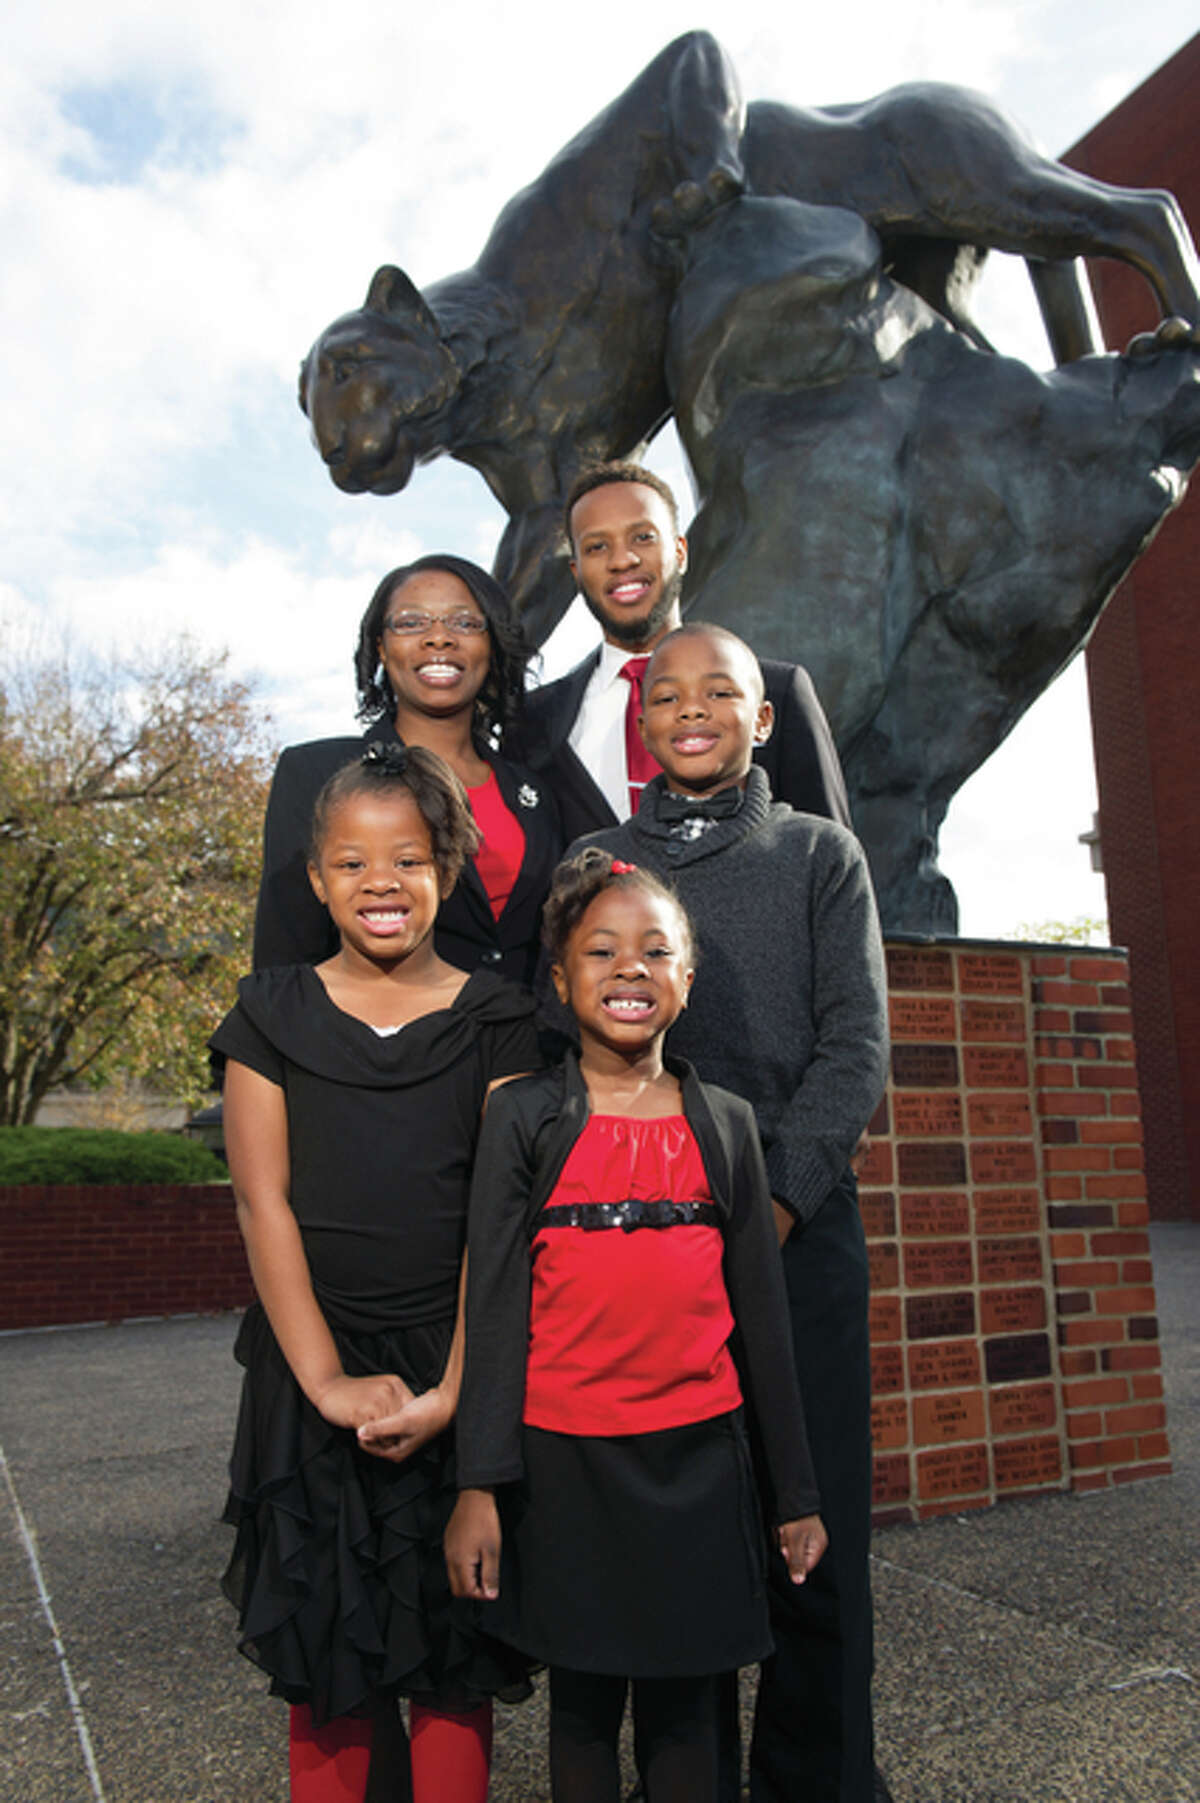 Brandi Jackson shares in the excitement of her graduation with her husband and three children.